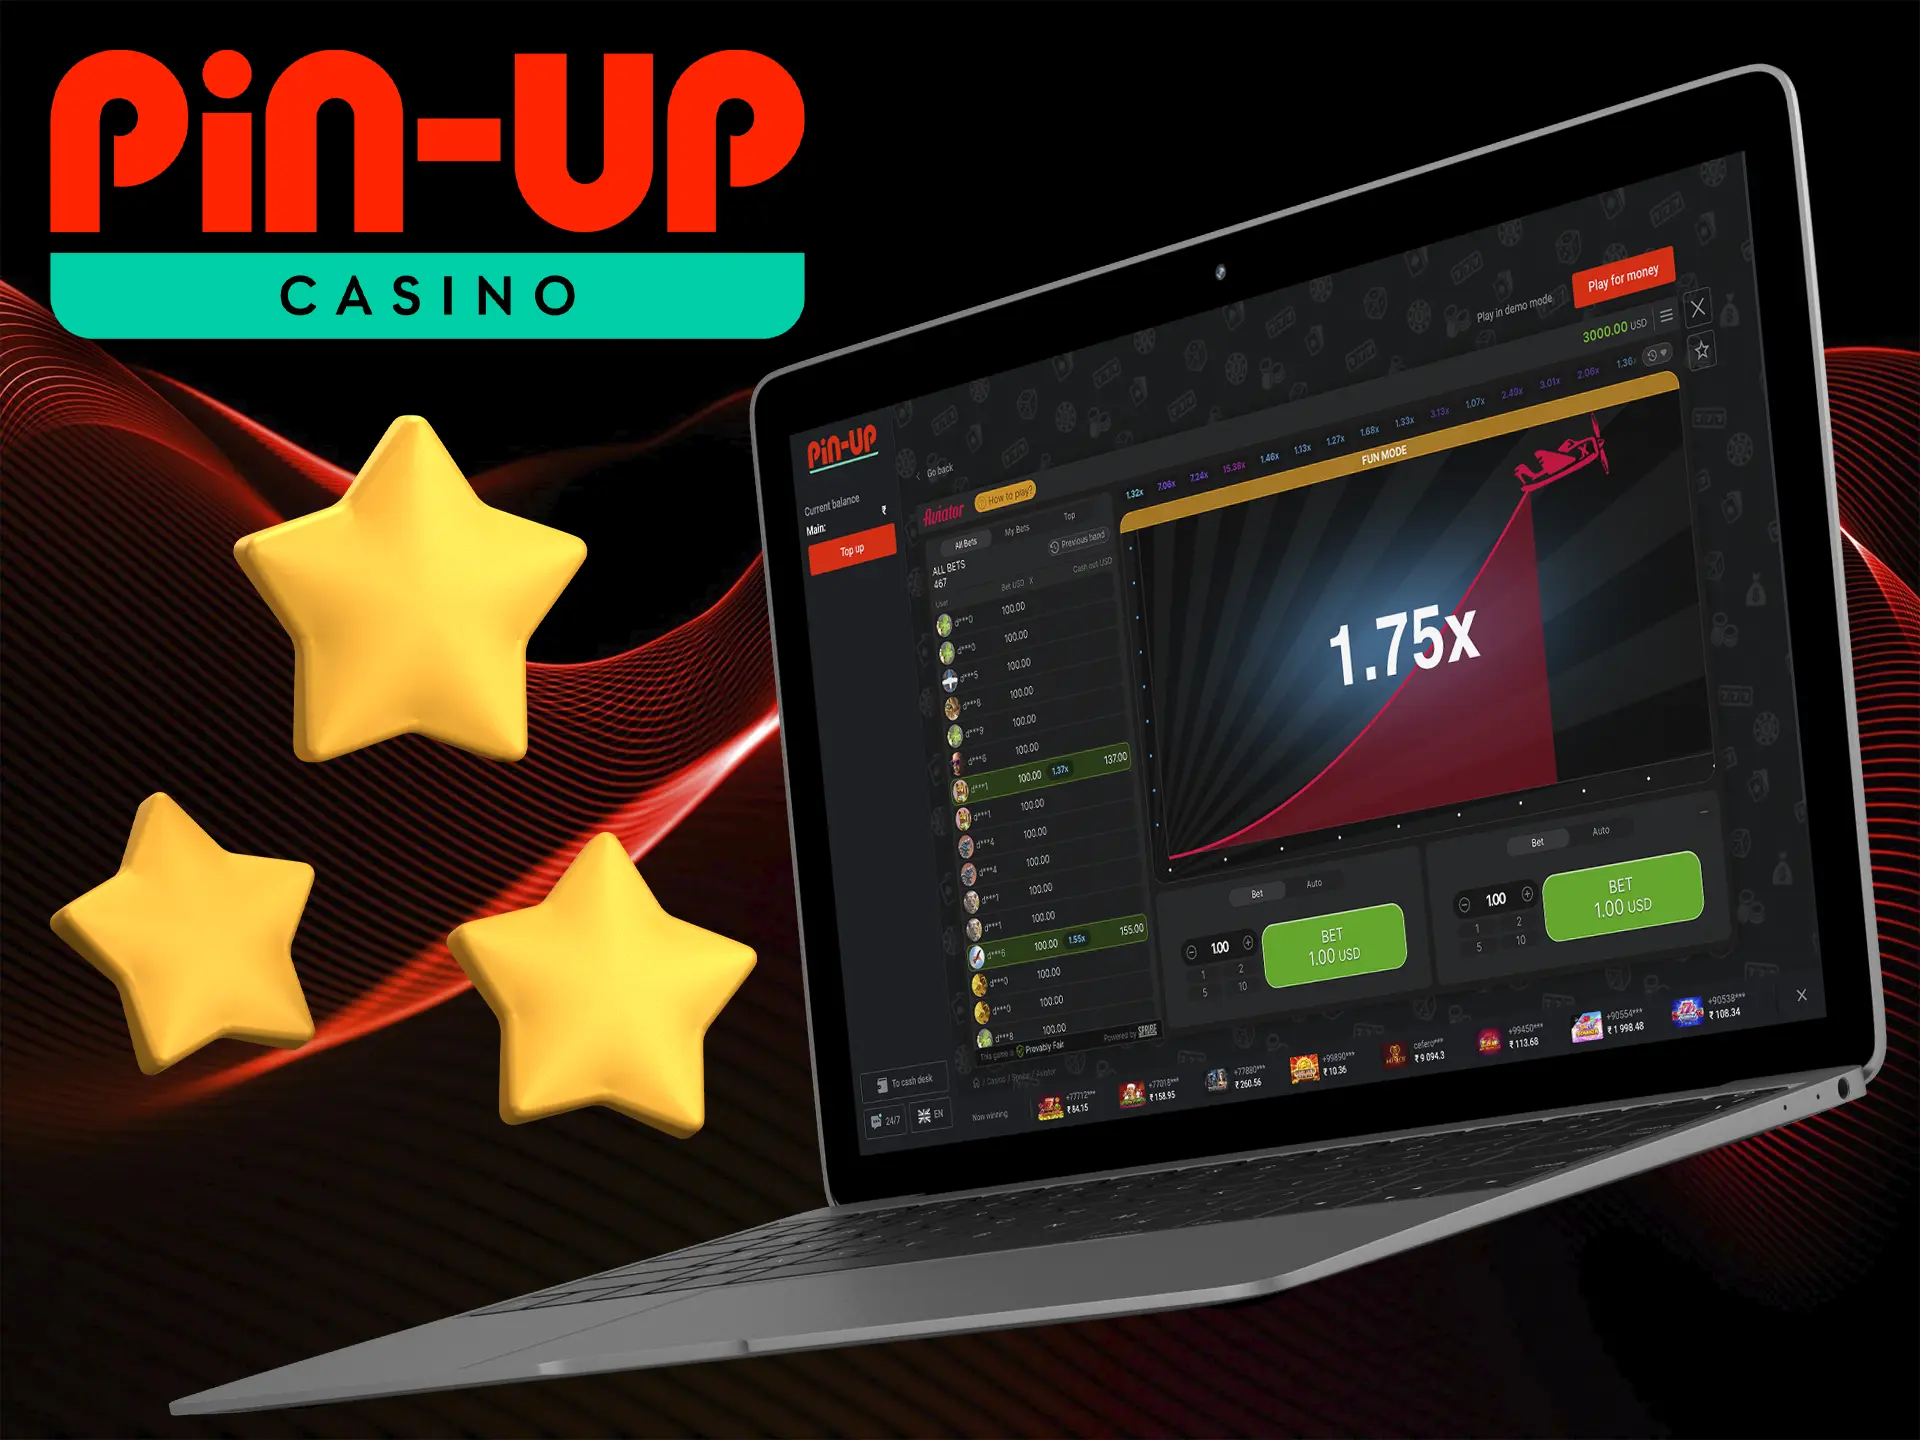 Positive reviews from Pin Up Casino users bring the Aviator game to the highest slots ranking positions.